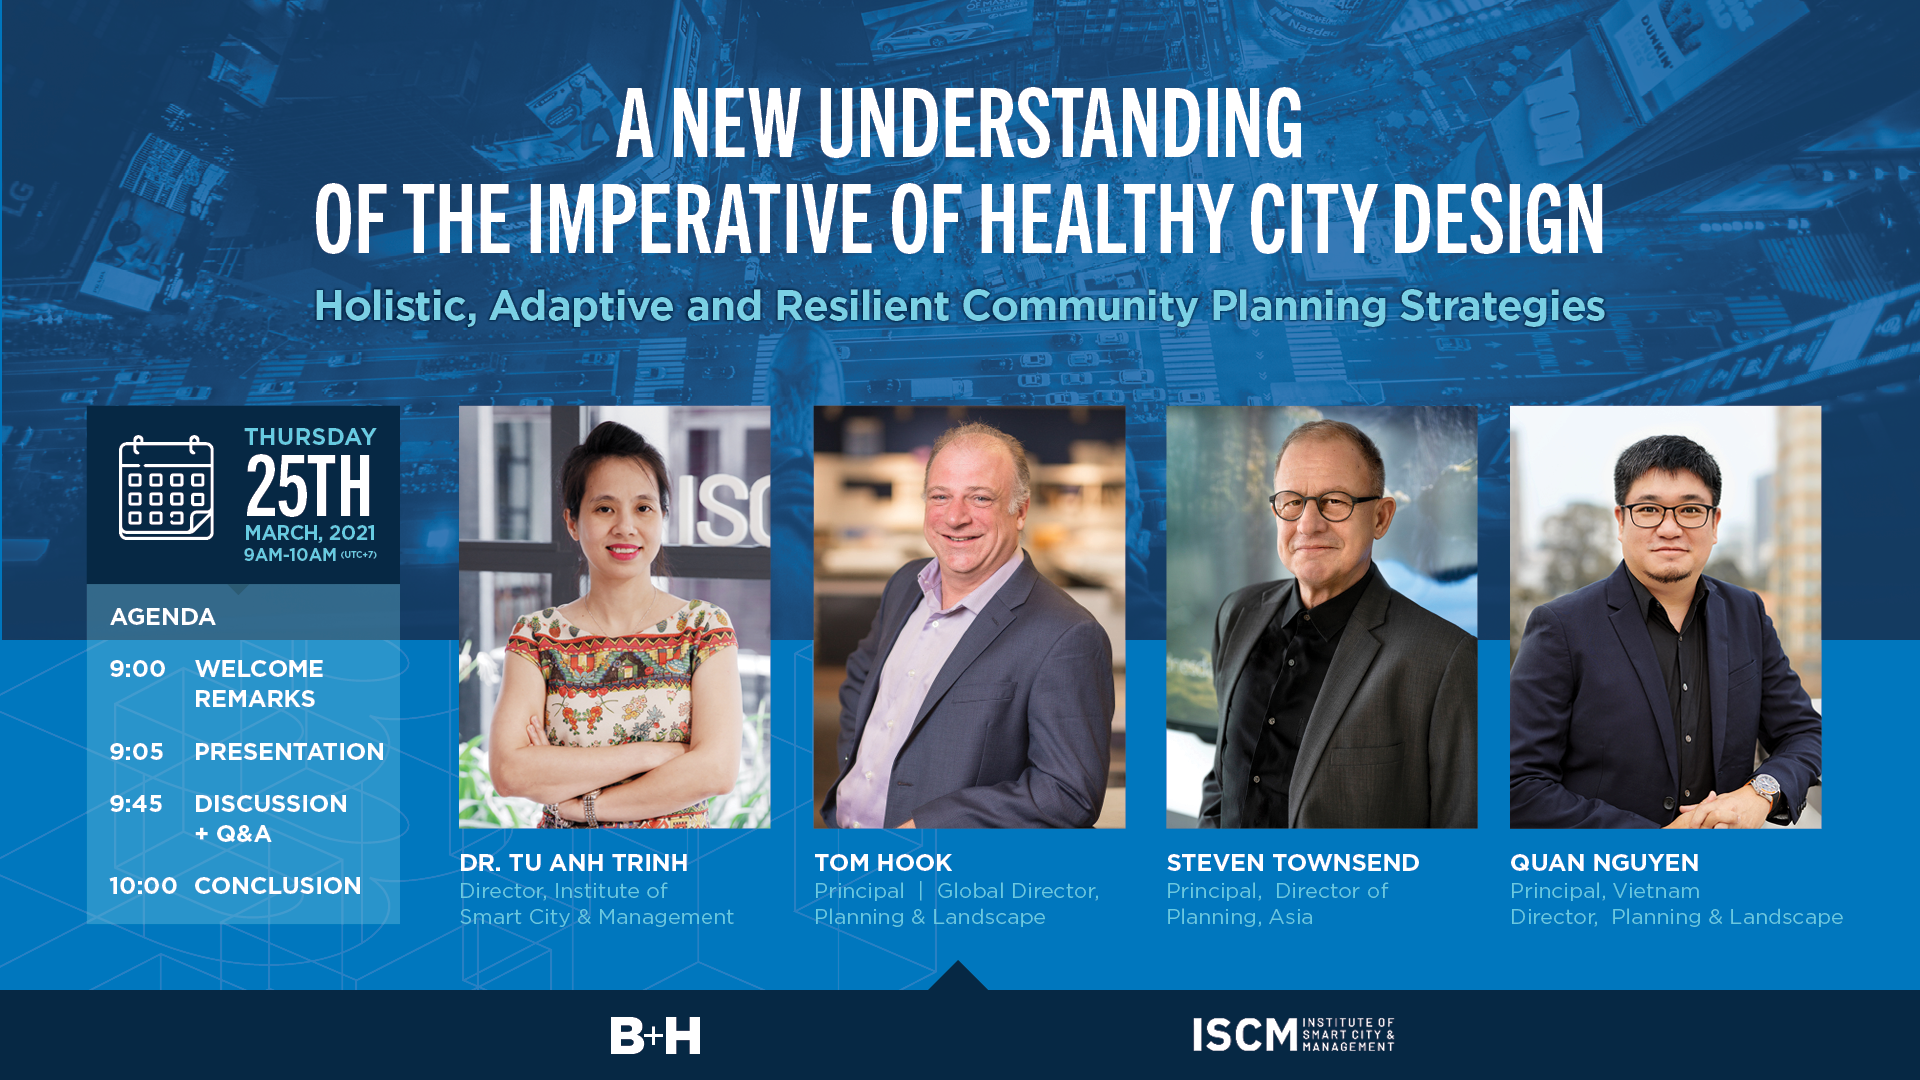 WEBINAR “A NEW UNDERSTANDING OF THE IMPERATIVE OF HEALTHY CITY DESIGN” OFFICIAL STARTS